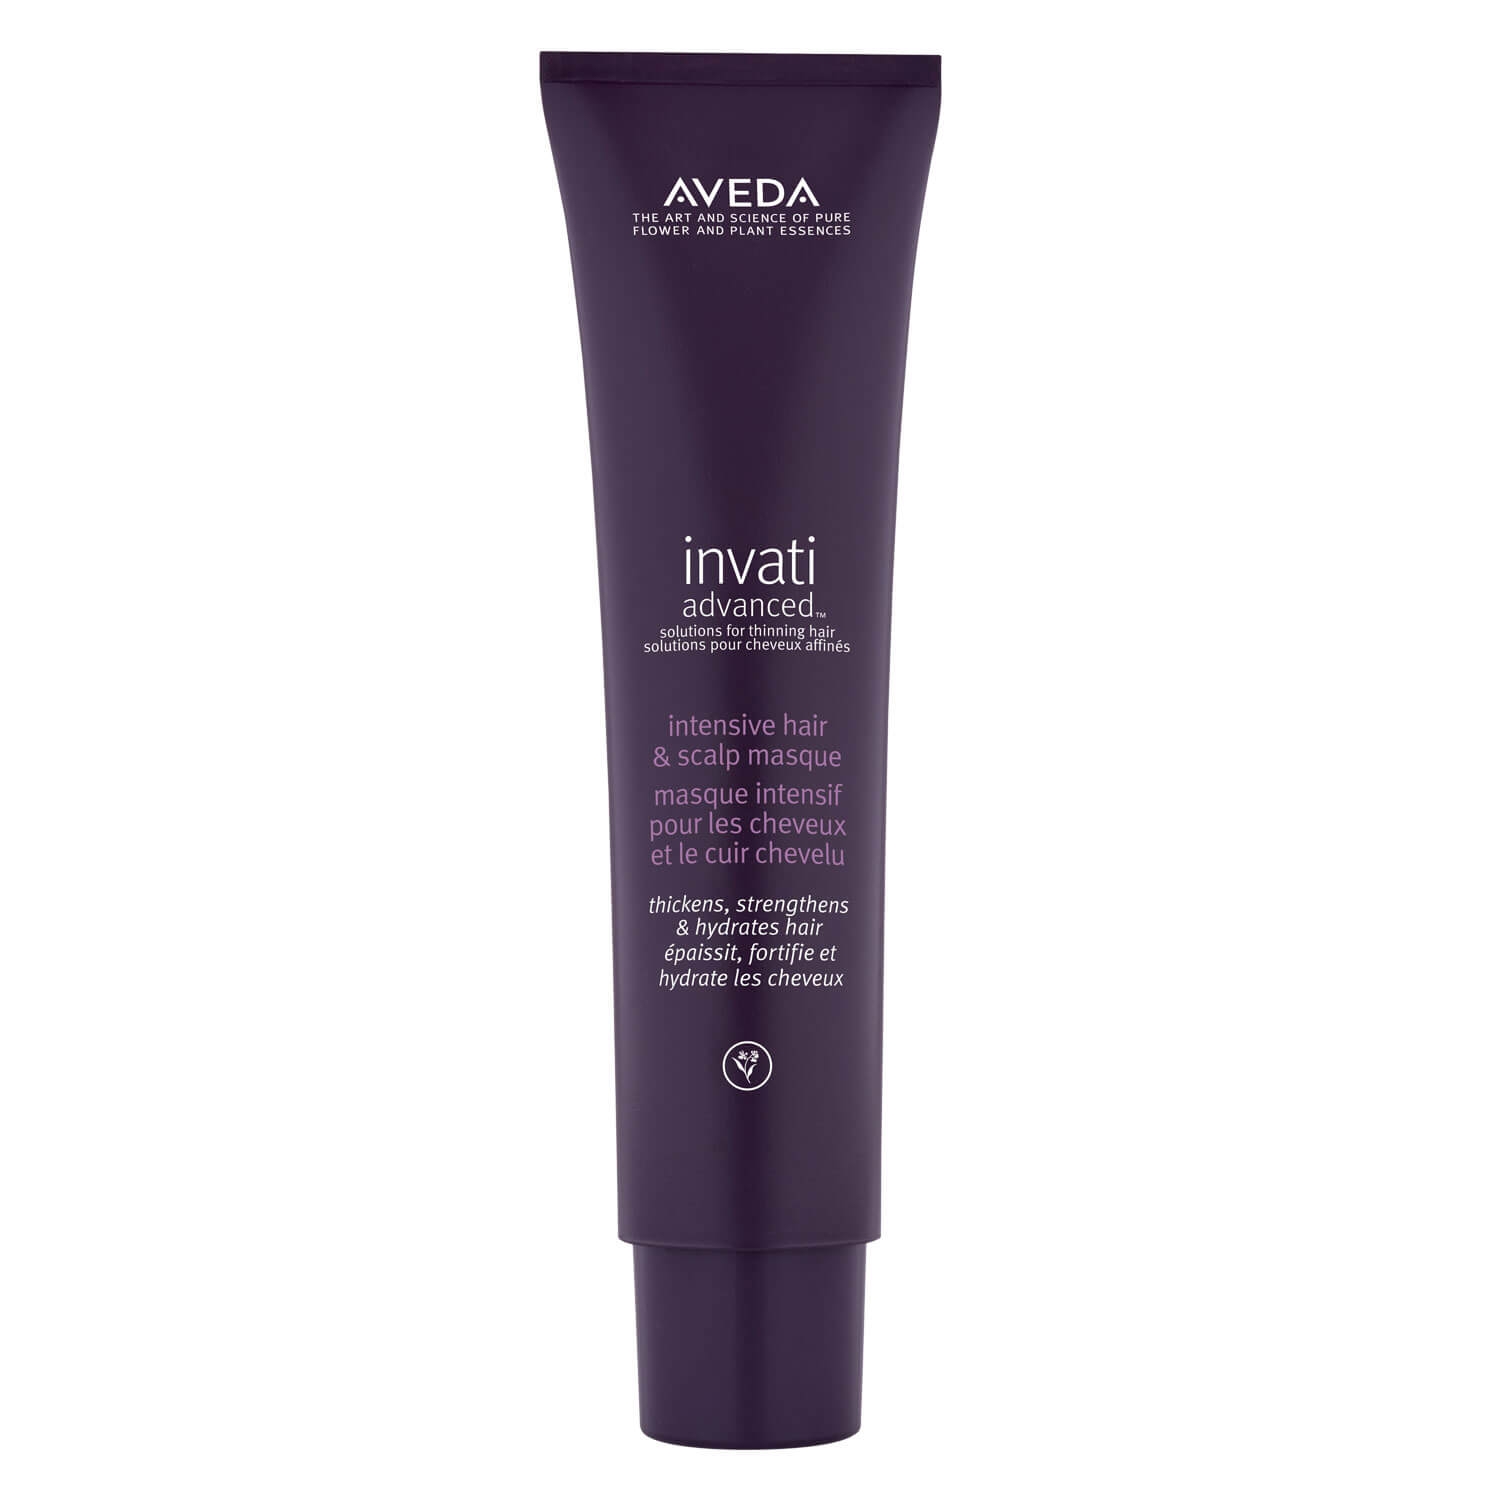 Product image from invati advanced - intensive hair & scalp masque